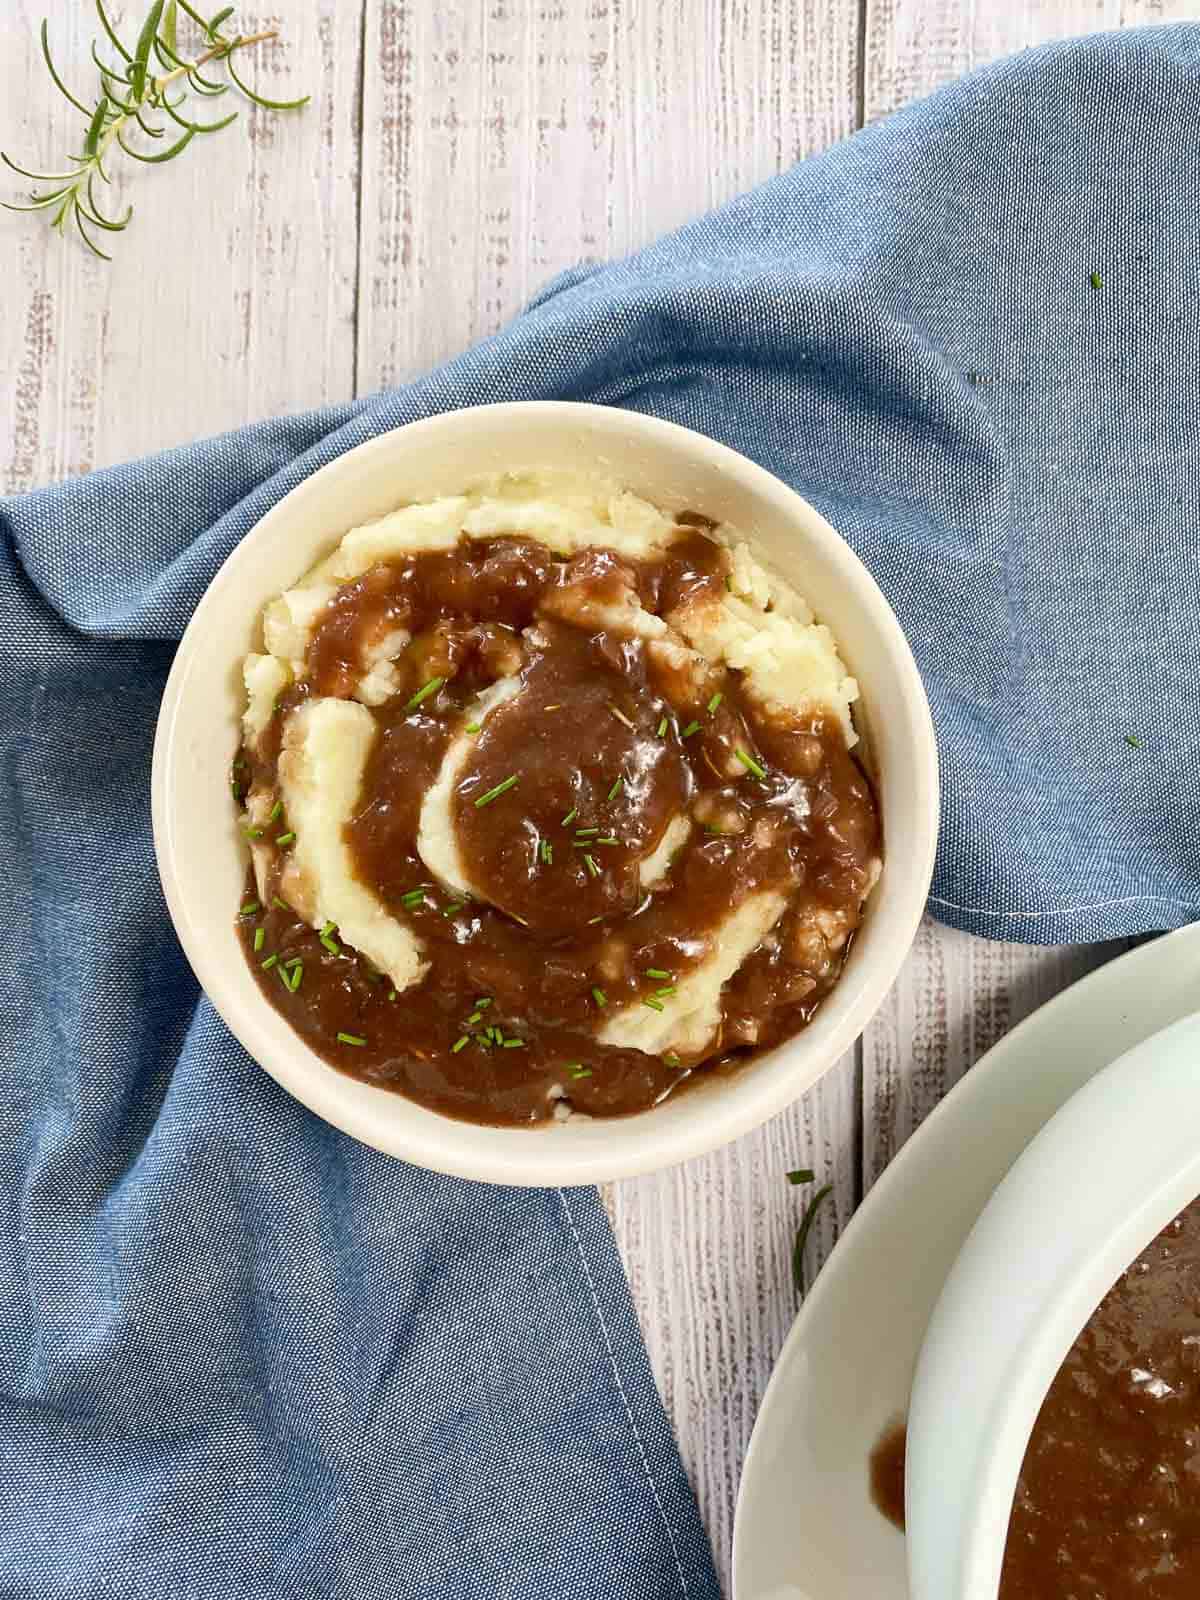 Mashed potatoes with onion gravy on top and fresh chive garnish.